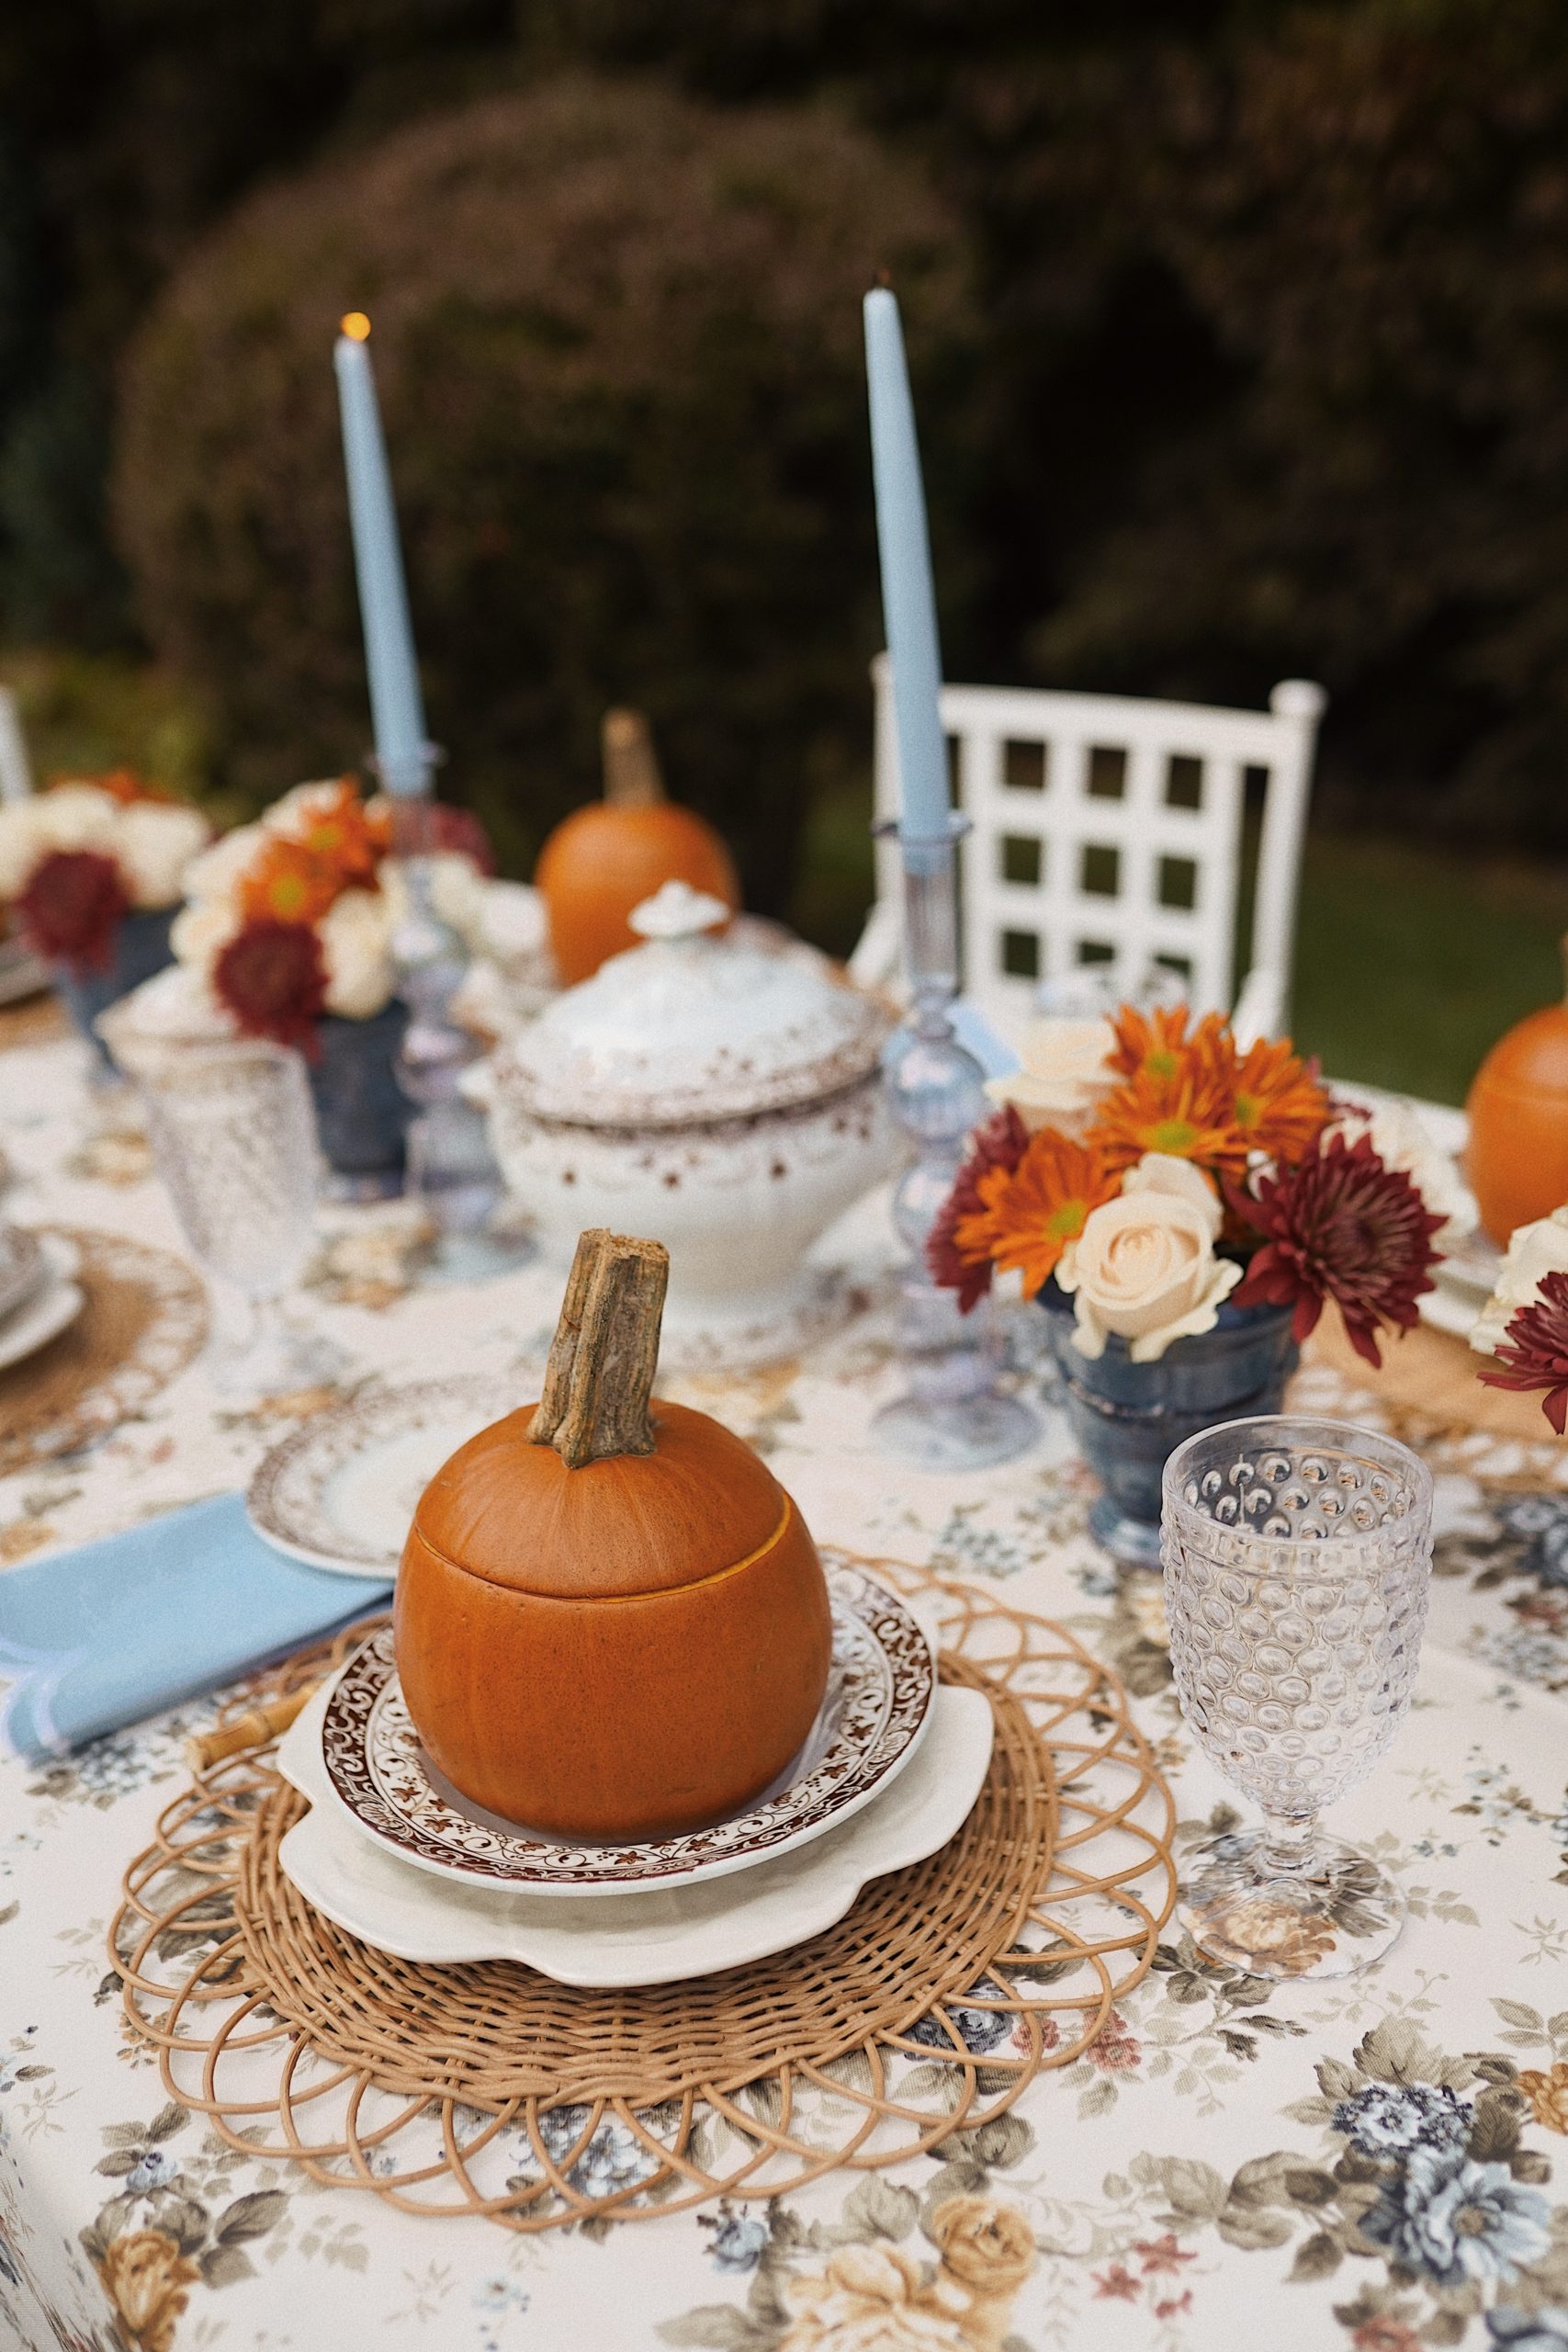 Autumn Brunch Table In The Backyard With Pumpkin And Yellow Deco -  Patioworld